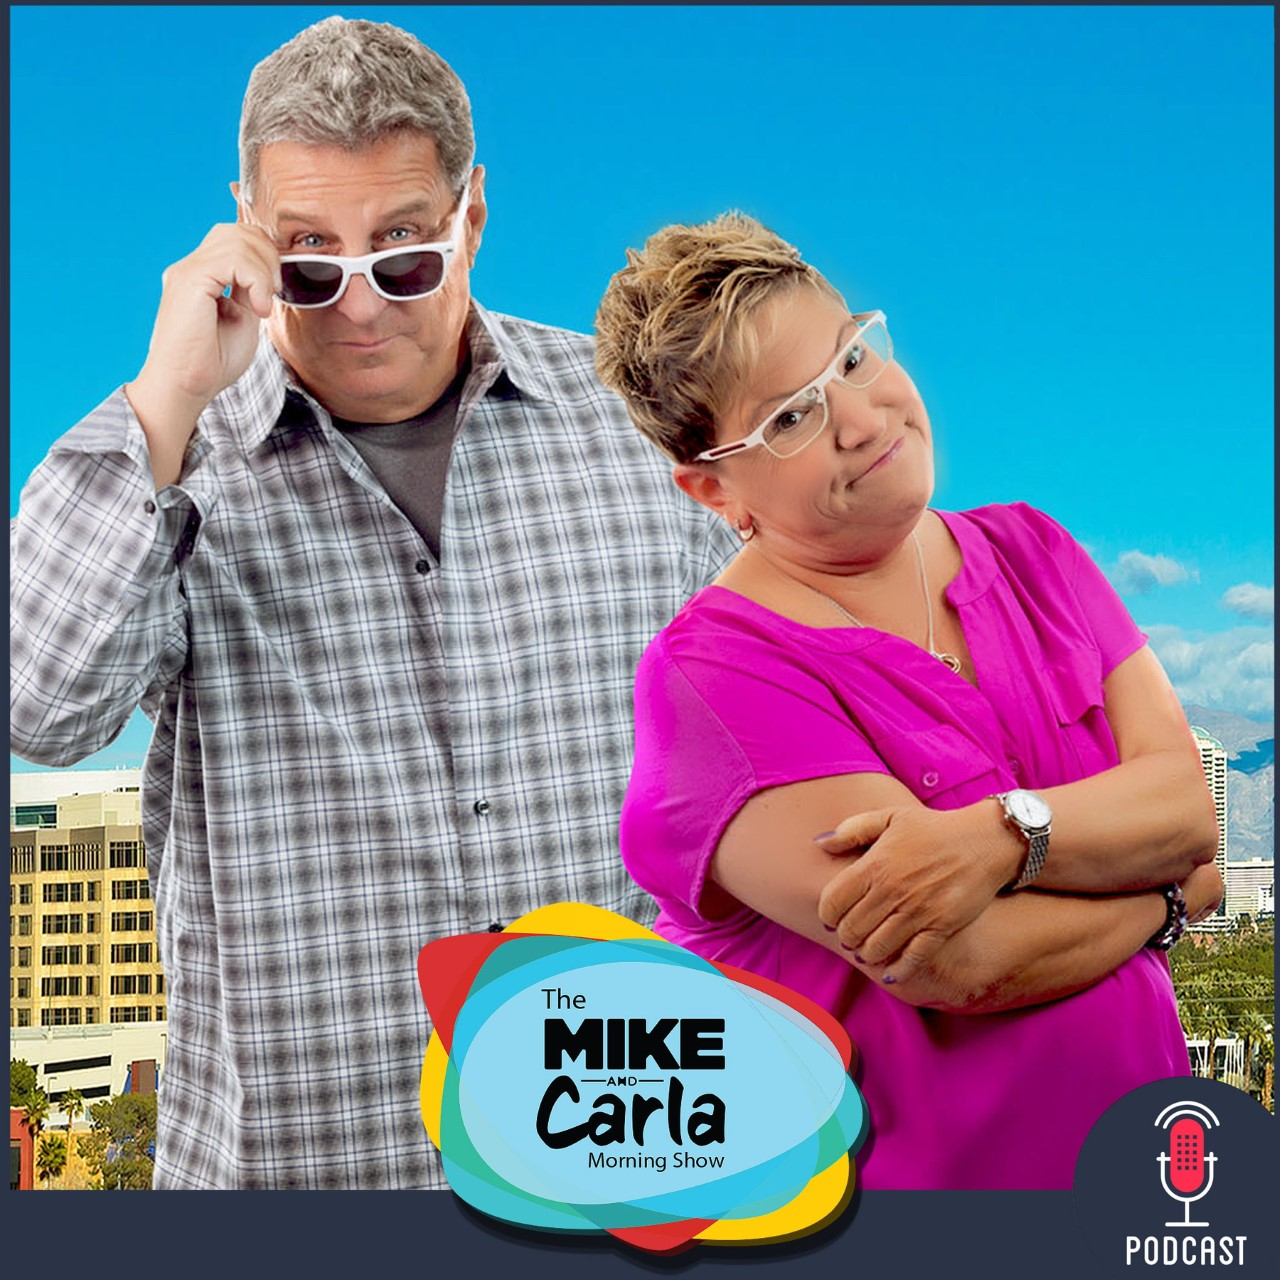 Mike & Carla Morning Show Podcast: Show #2110